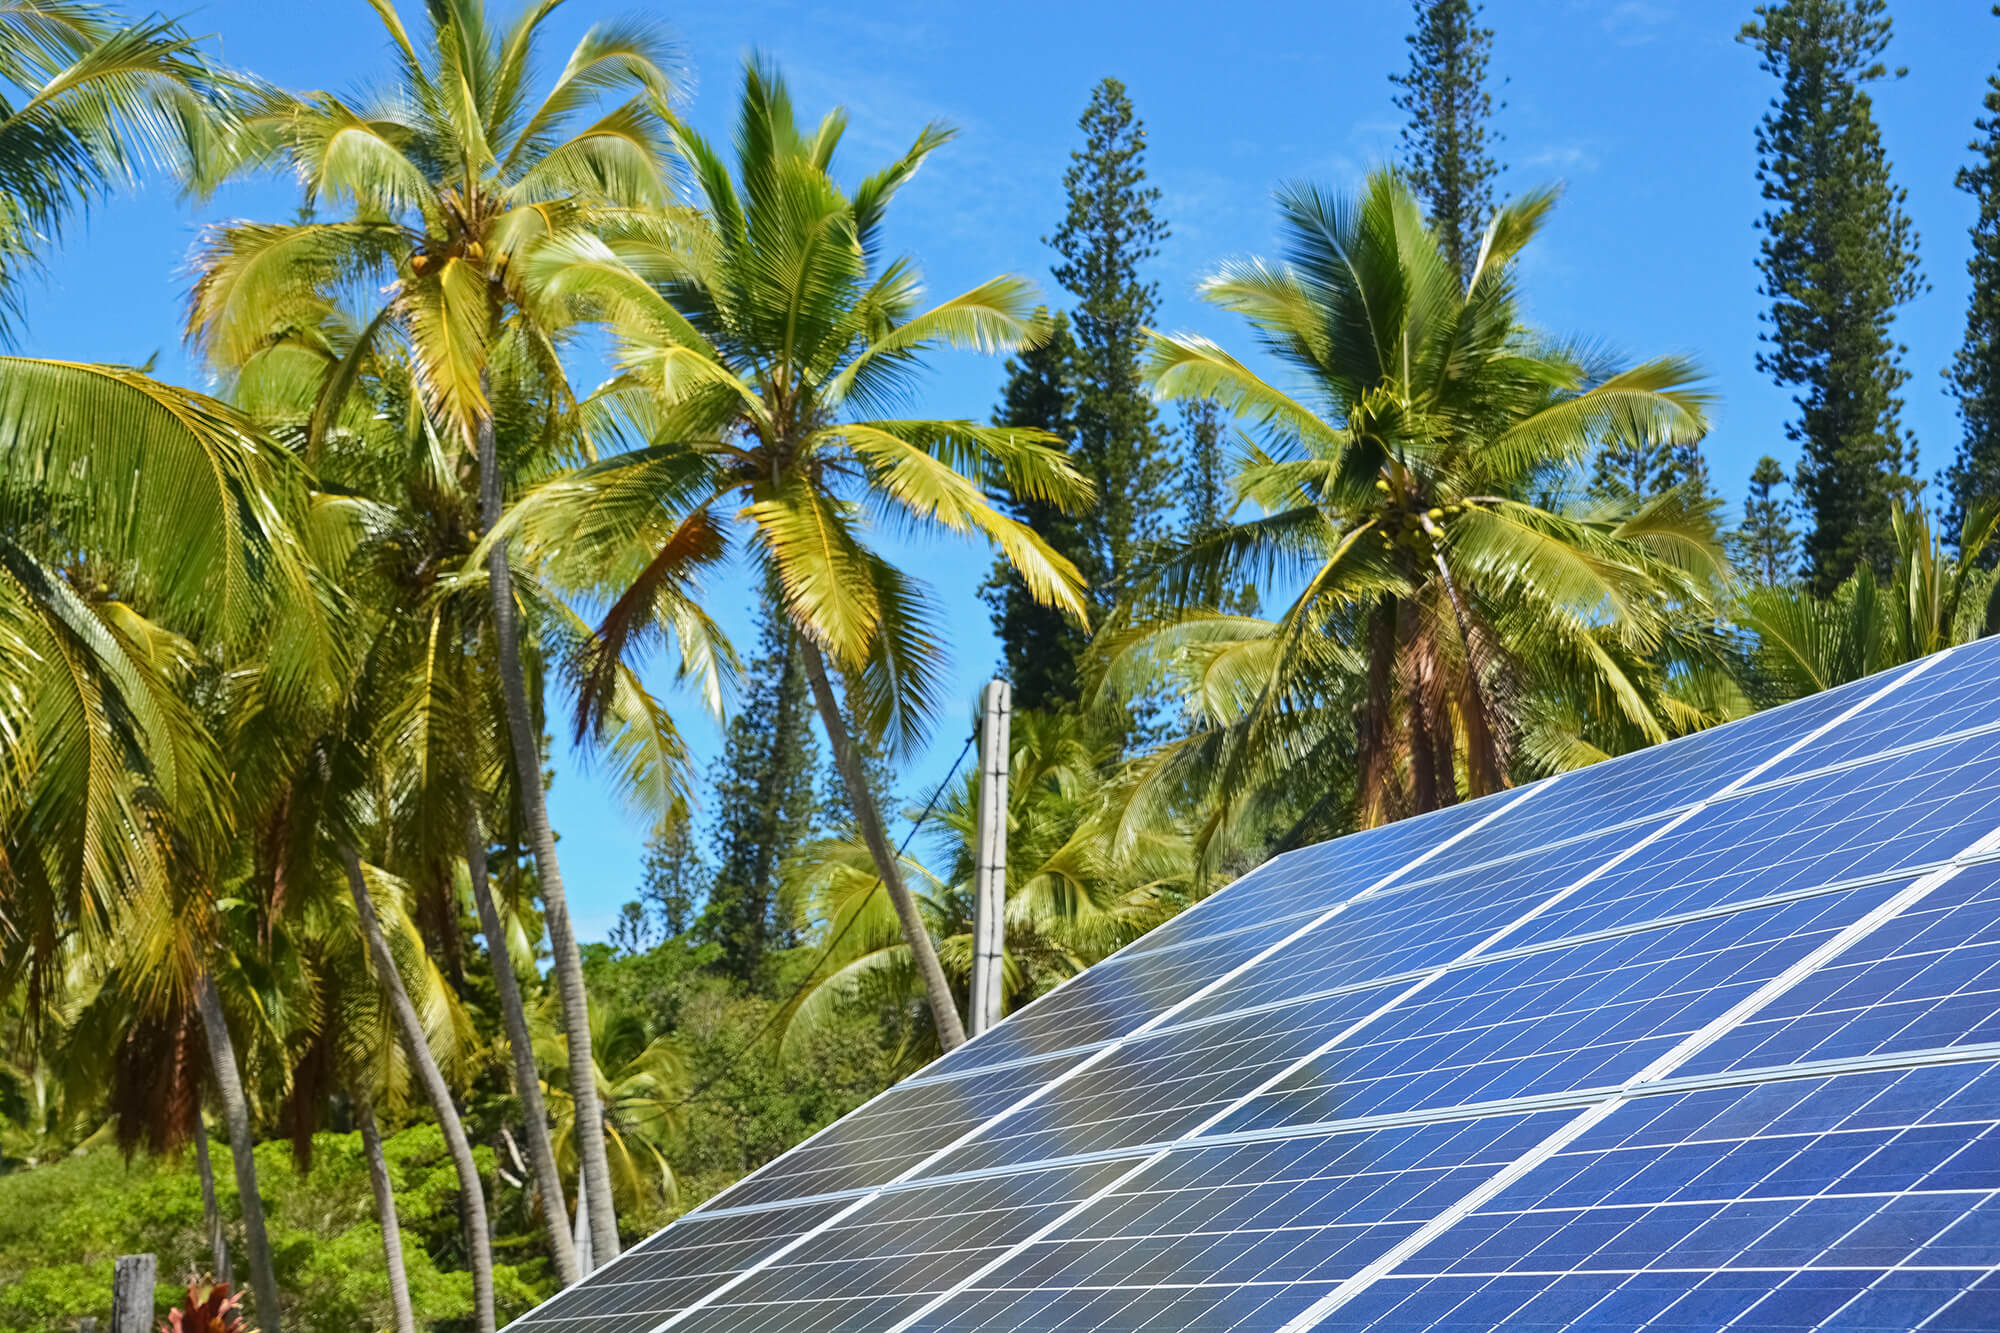 Solar panels on house roof with palm trees in the background